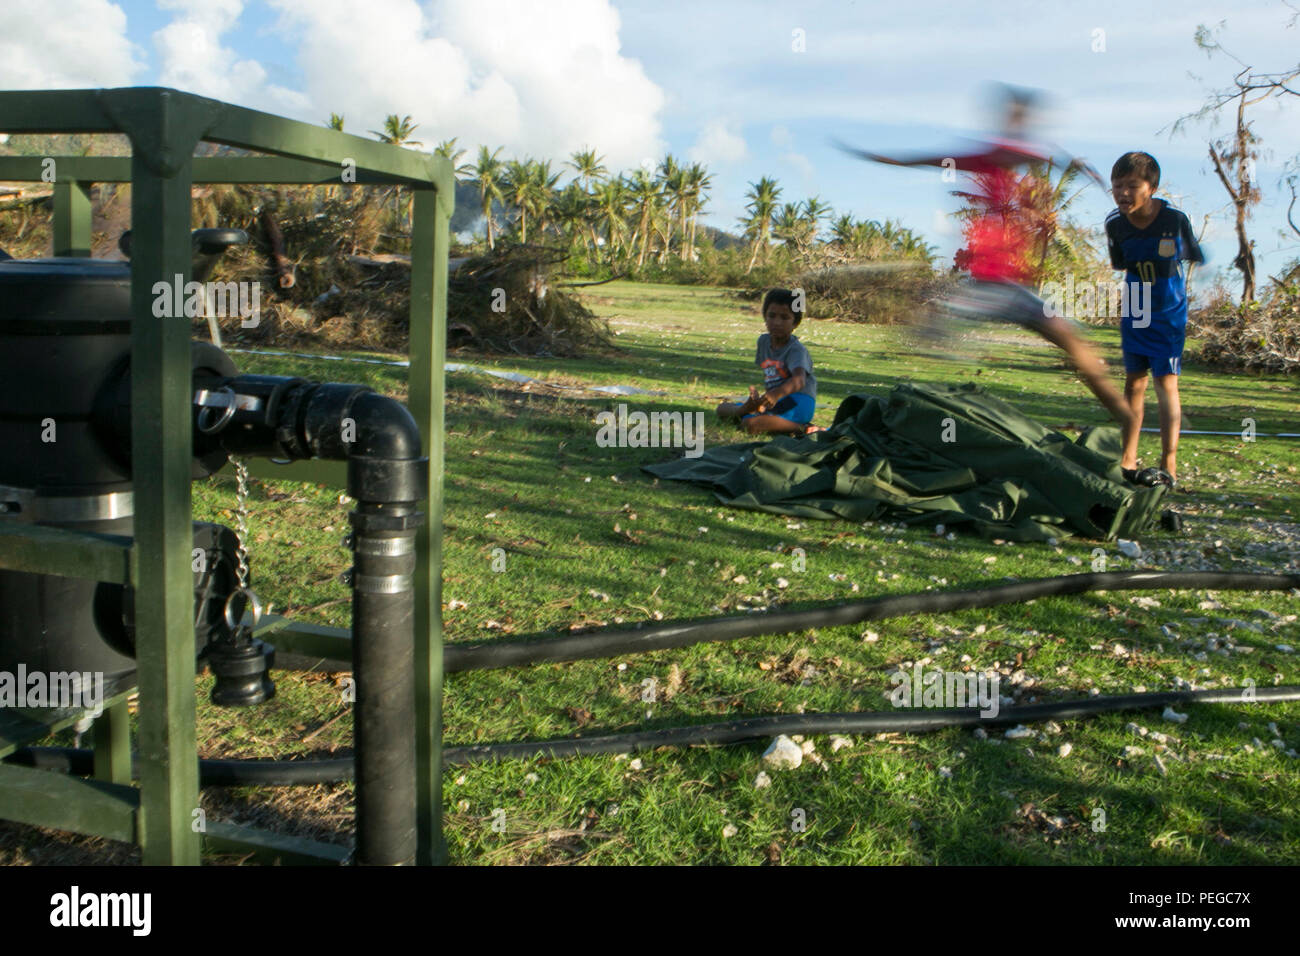 Local children jump over a storage bag from a Light Weight Purification System belonging to Combat Logistics Battalion, 31st Marine Expeditonary Unit, at a water purification site in Saipan, Aug. 10, 2015. The LWPS will be used to turn seawater into potable water for the people of Saipan. The 31st MEU and the ships of the Bonhomme Richard Amphibious Ready Group are assisting federal and local agencies with distributing emergency relief supplies to Saipan after it was struck by Typhoon Soudelor, Aug. 2-3. (U.S. Marine Corps photo by Lance Cpl. Brian Bekkala/Released) Stock Photo